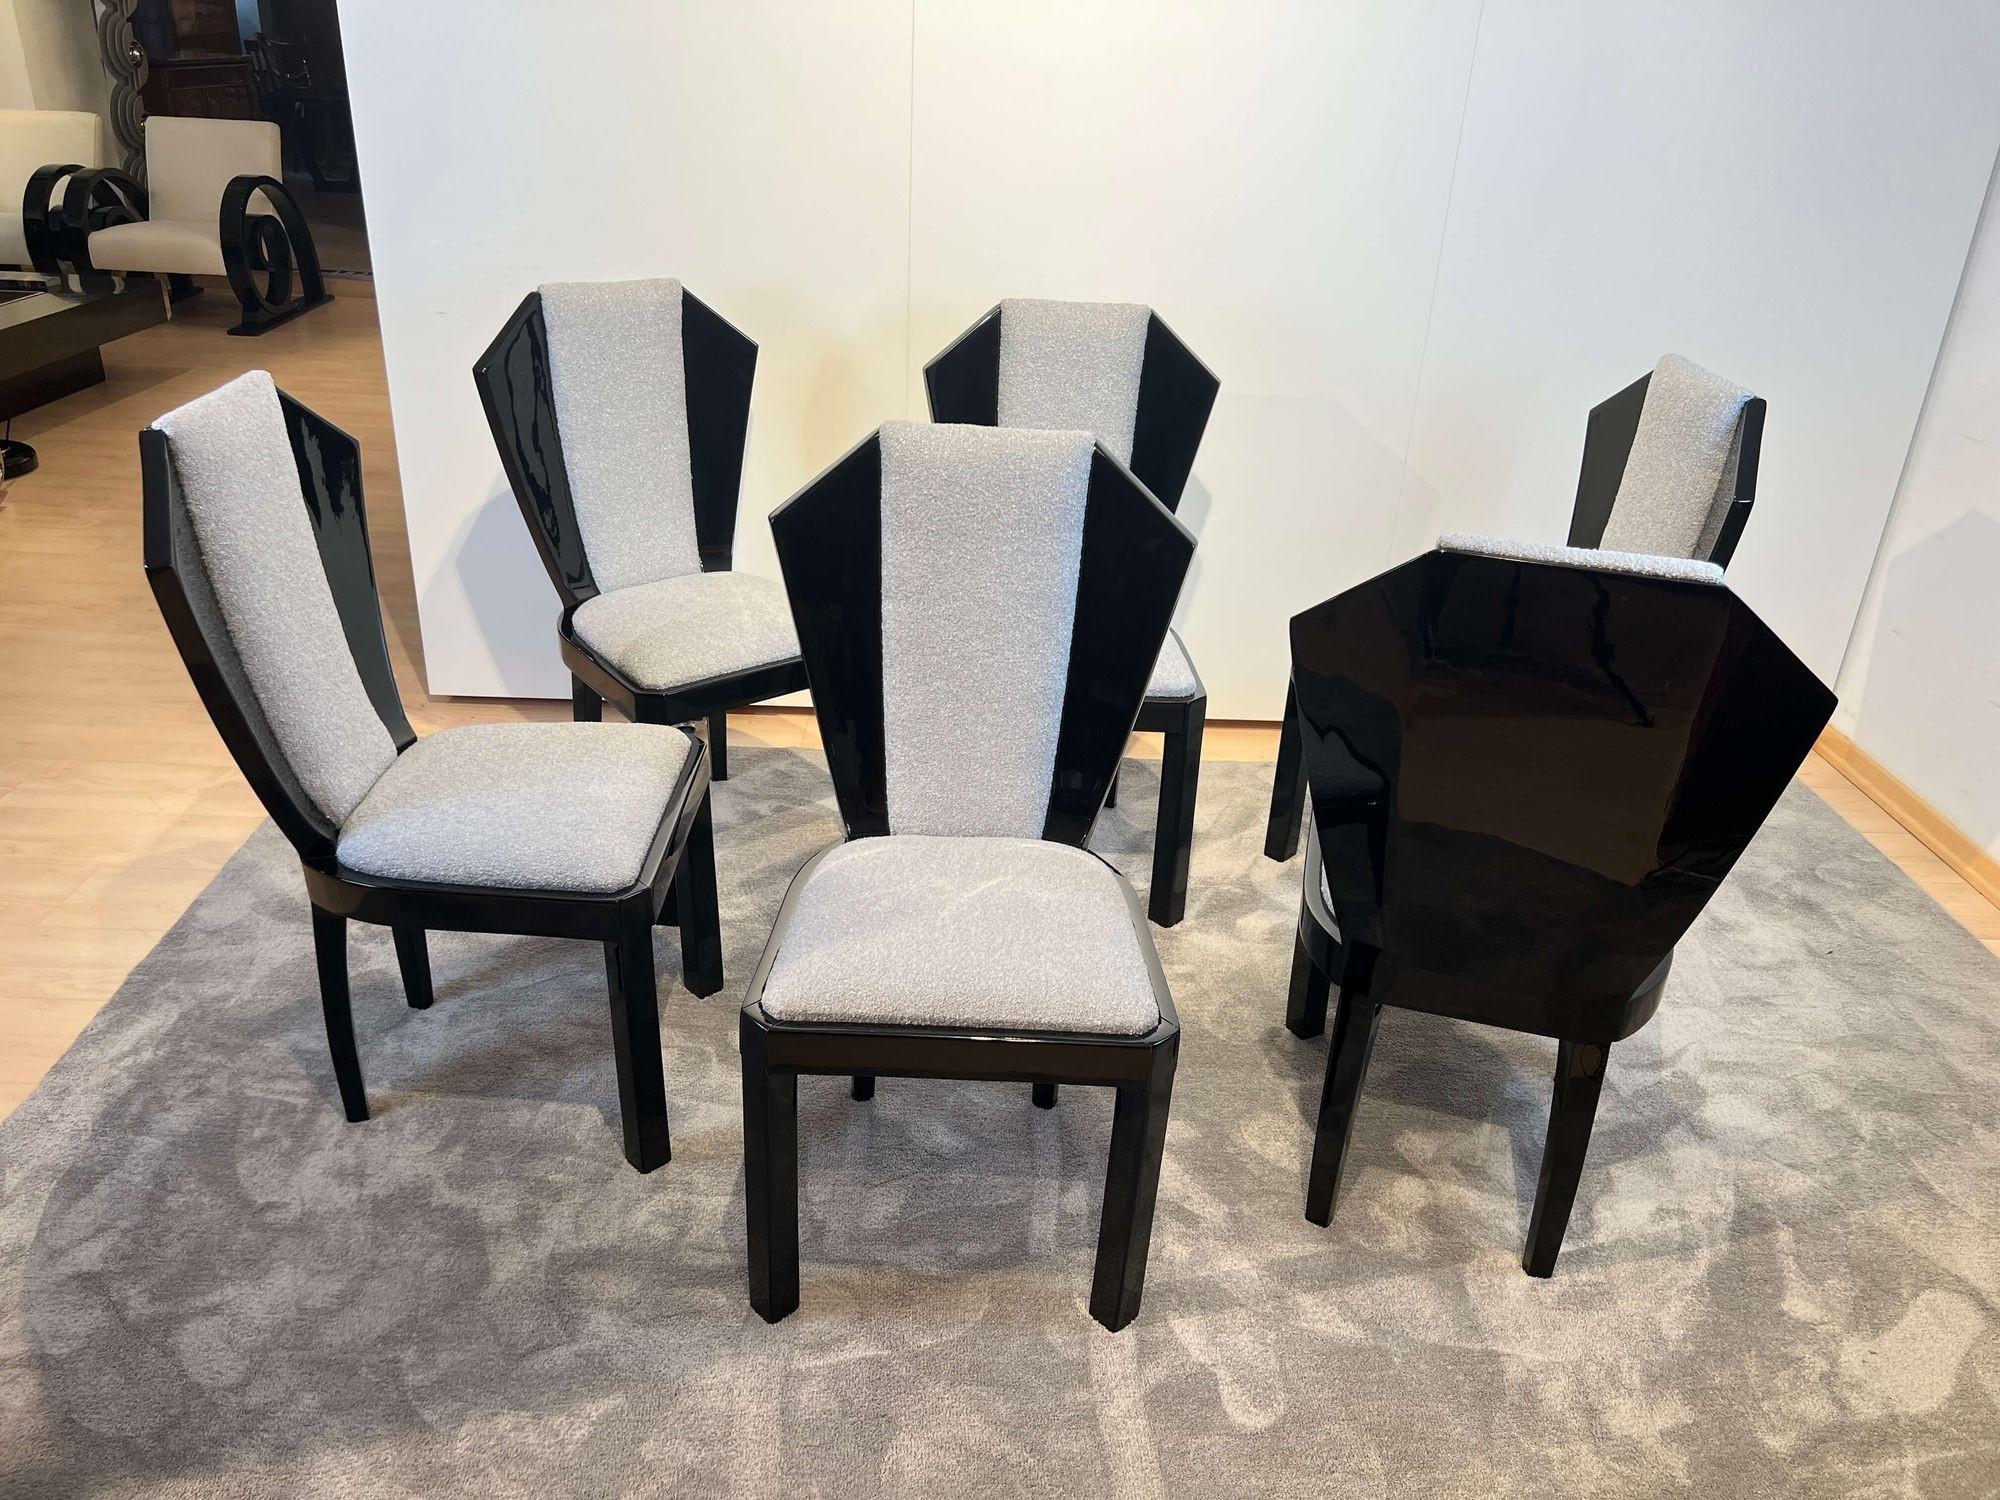 Set of Six Art Deco Dining Chairs, Black Lacquer, Grey Fabric, France circa 1930 In Good Condition For Sale In Regensburg, DE